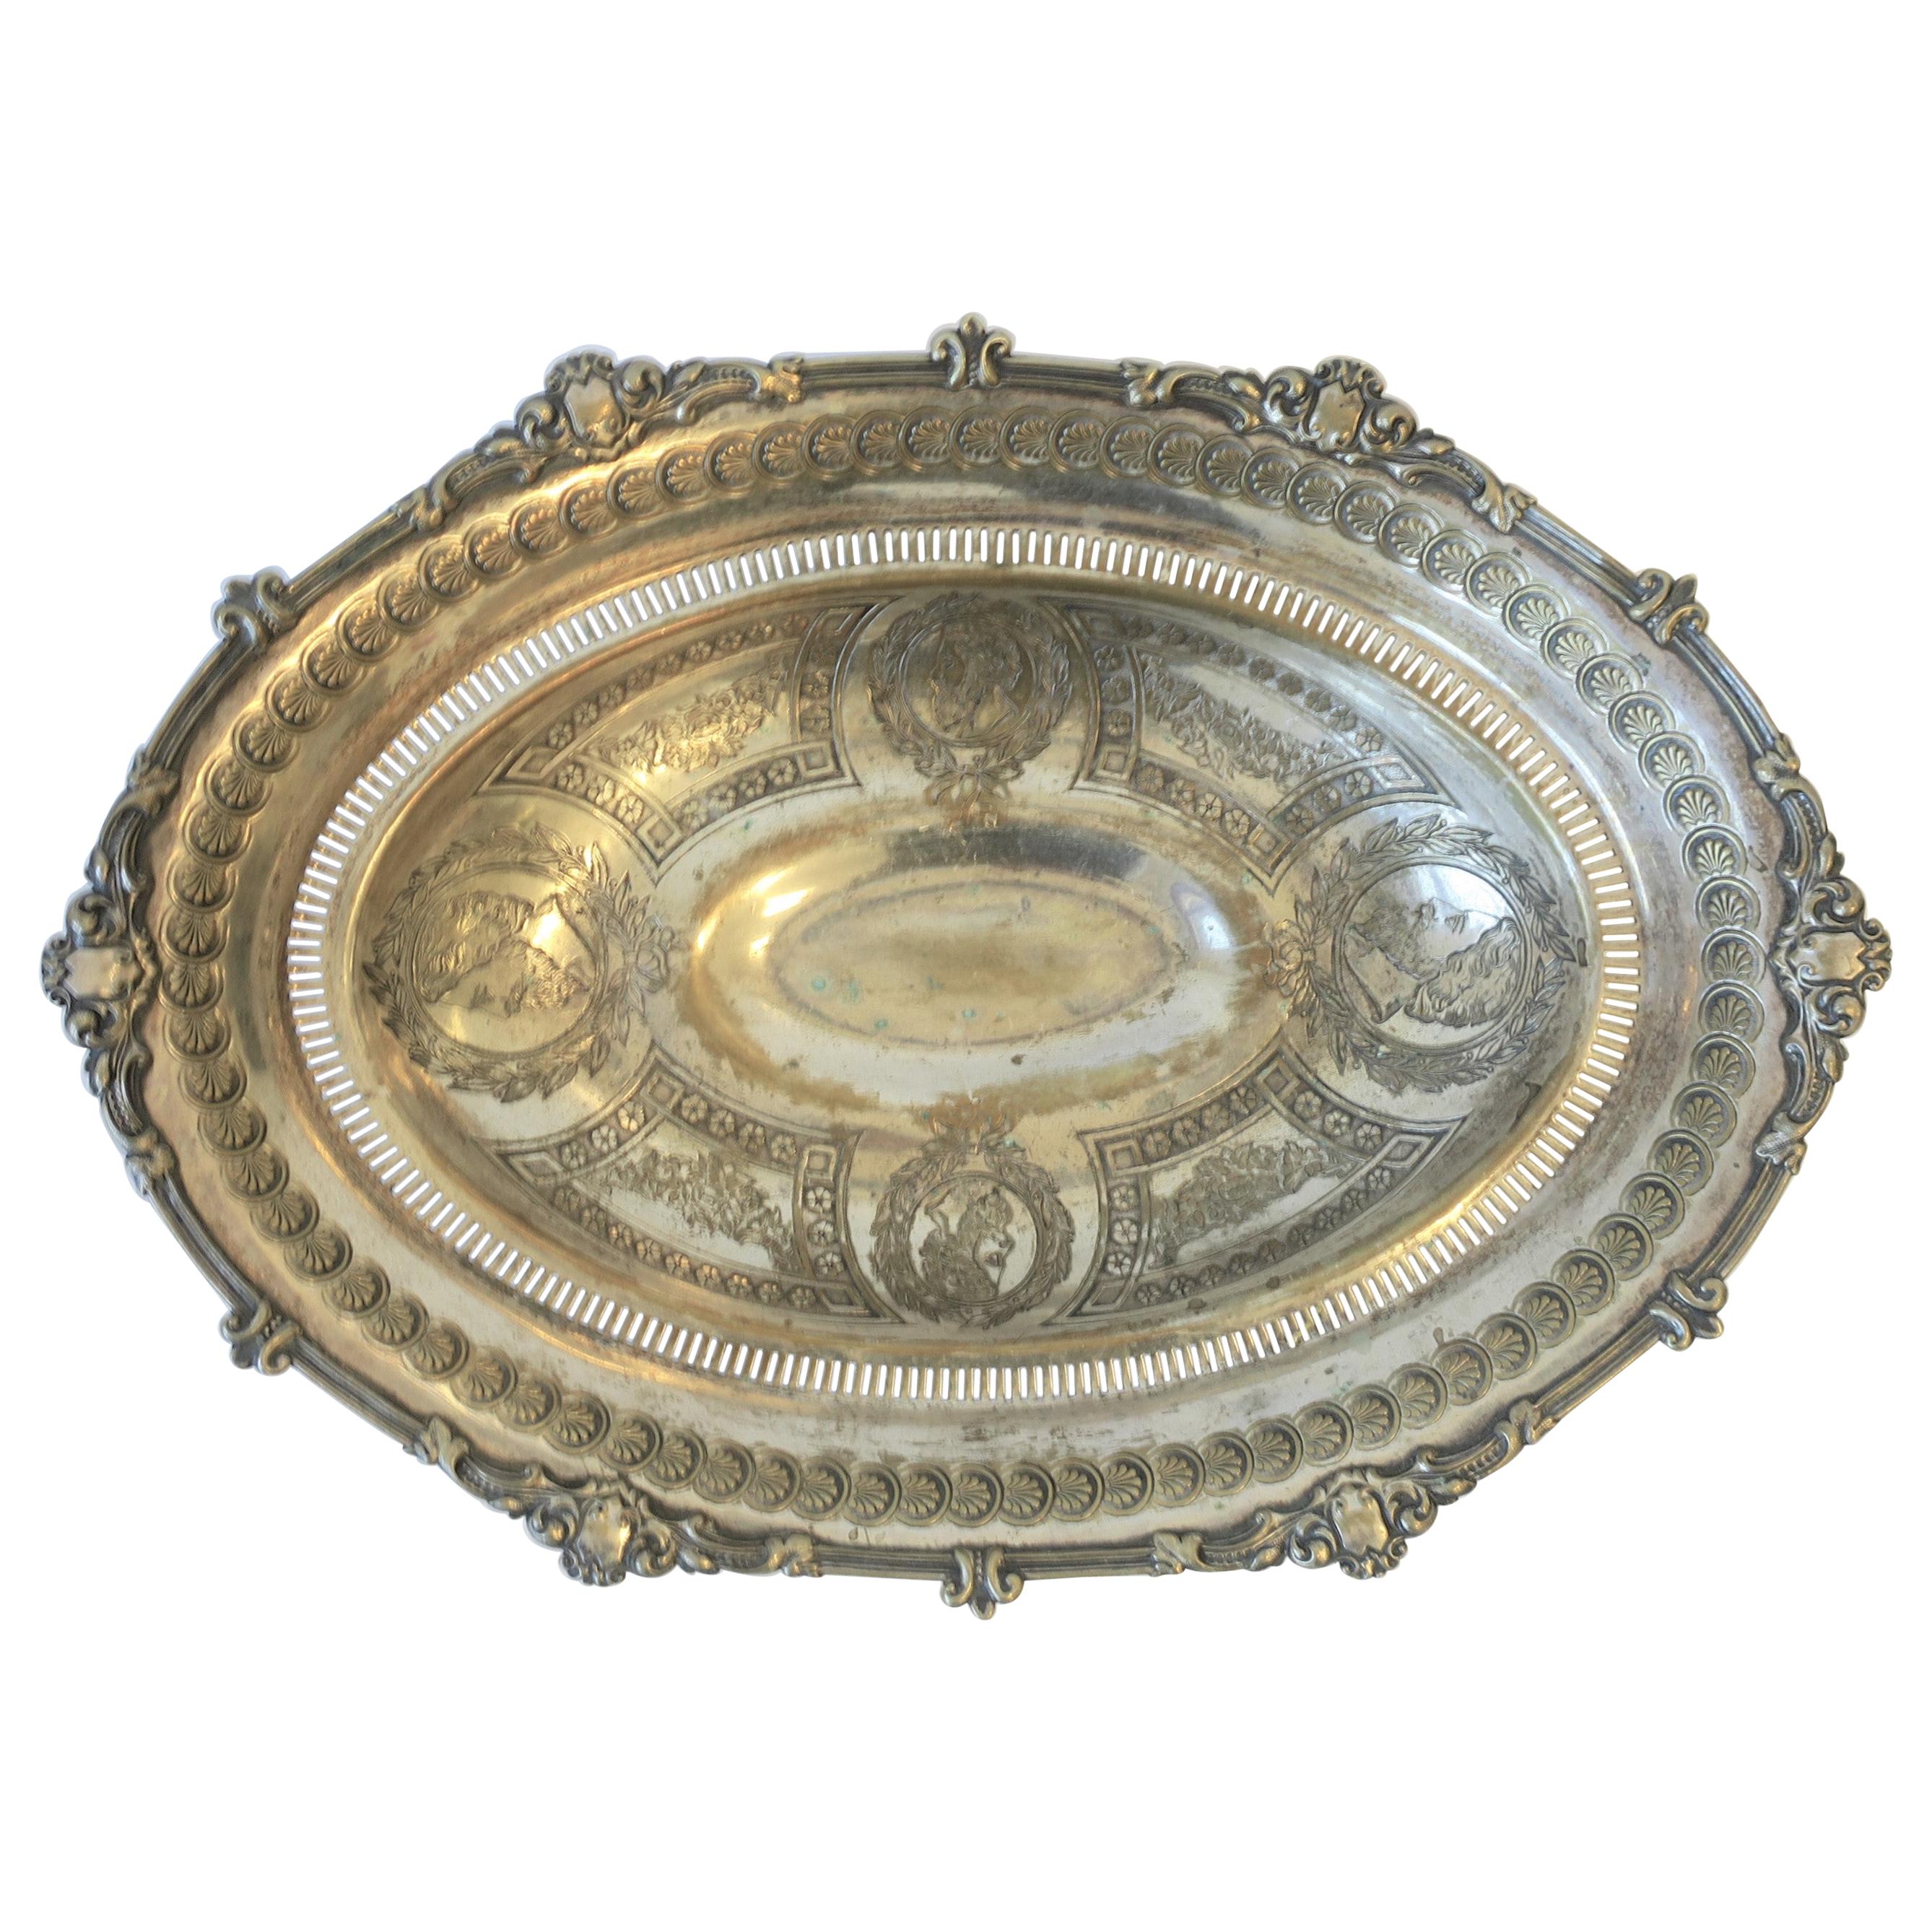 English Silver Footed Compote Bowl